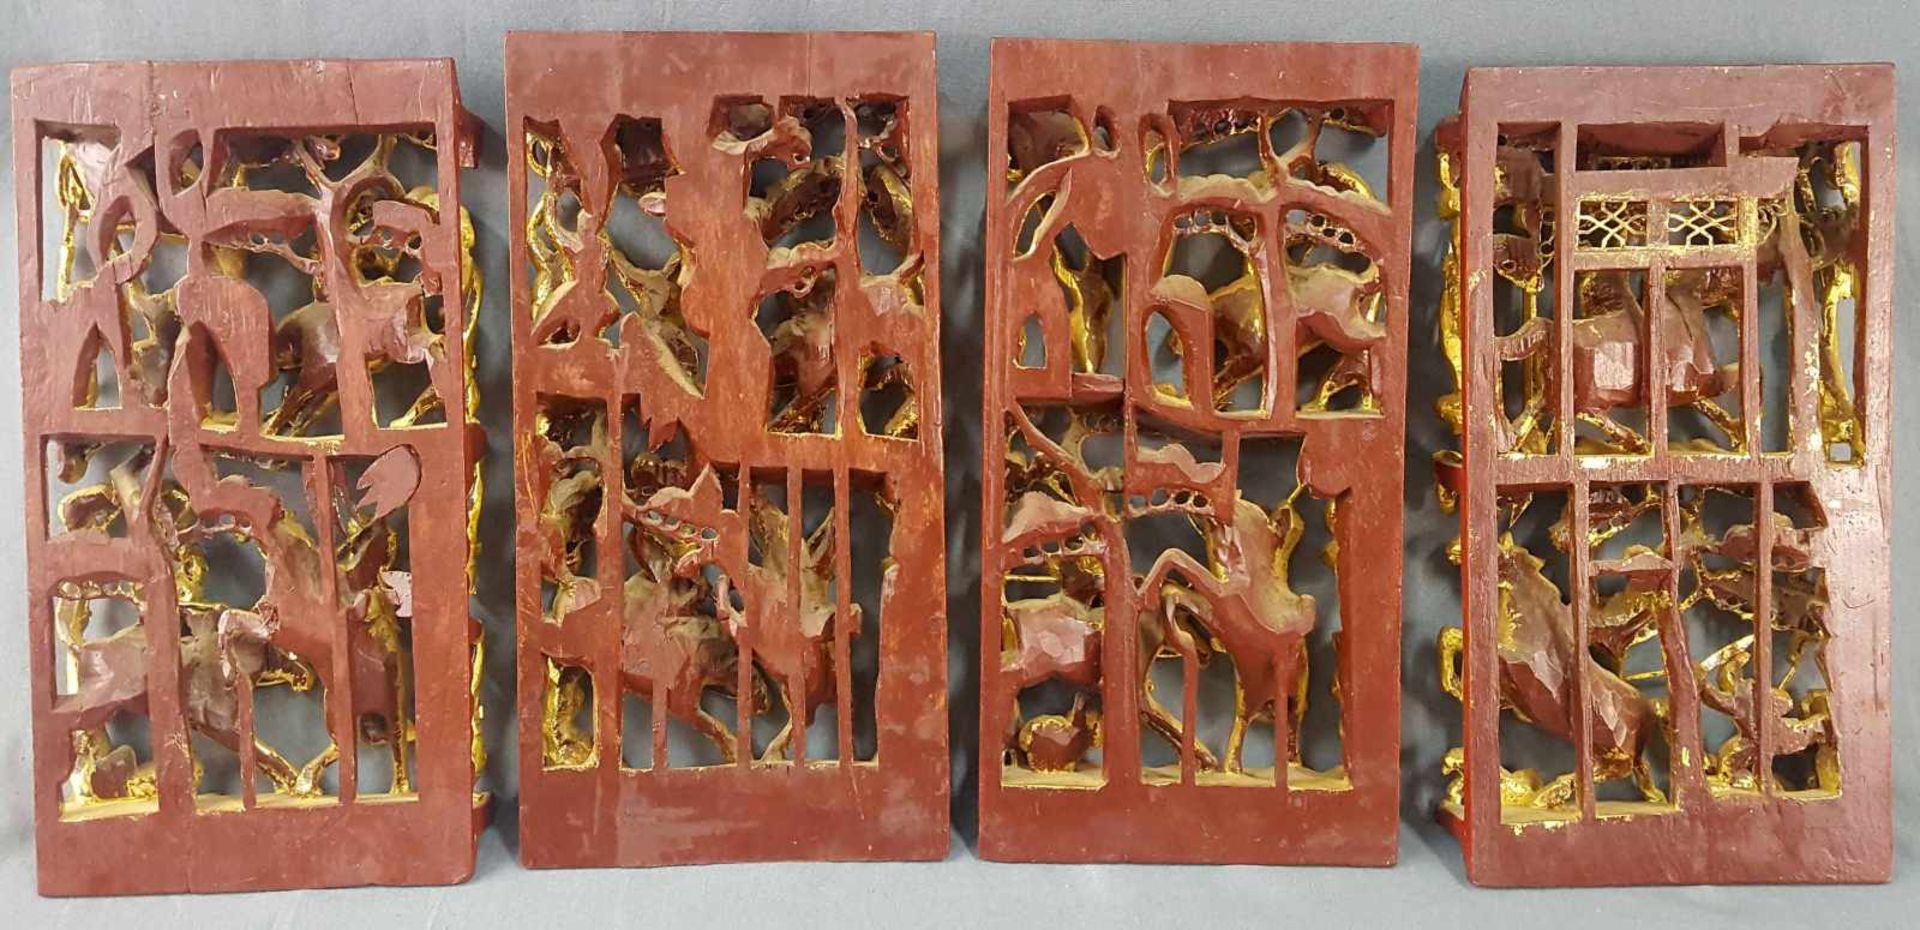 4 Relief Schnitzereien China. Holz. Goldfarben.Je 32 cm x 17,5 cm.4 Carvings China. Wood. Gold - Image 4 of 4